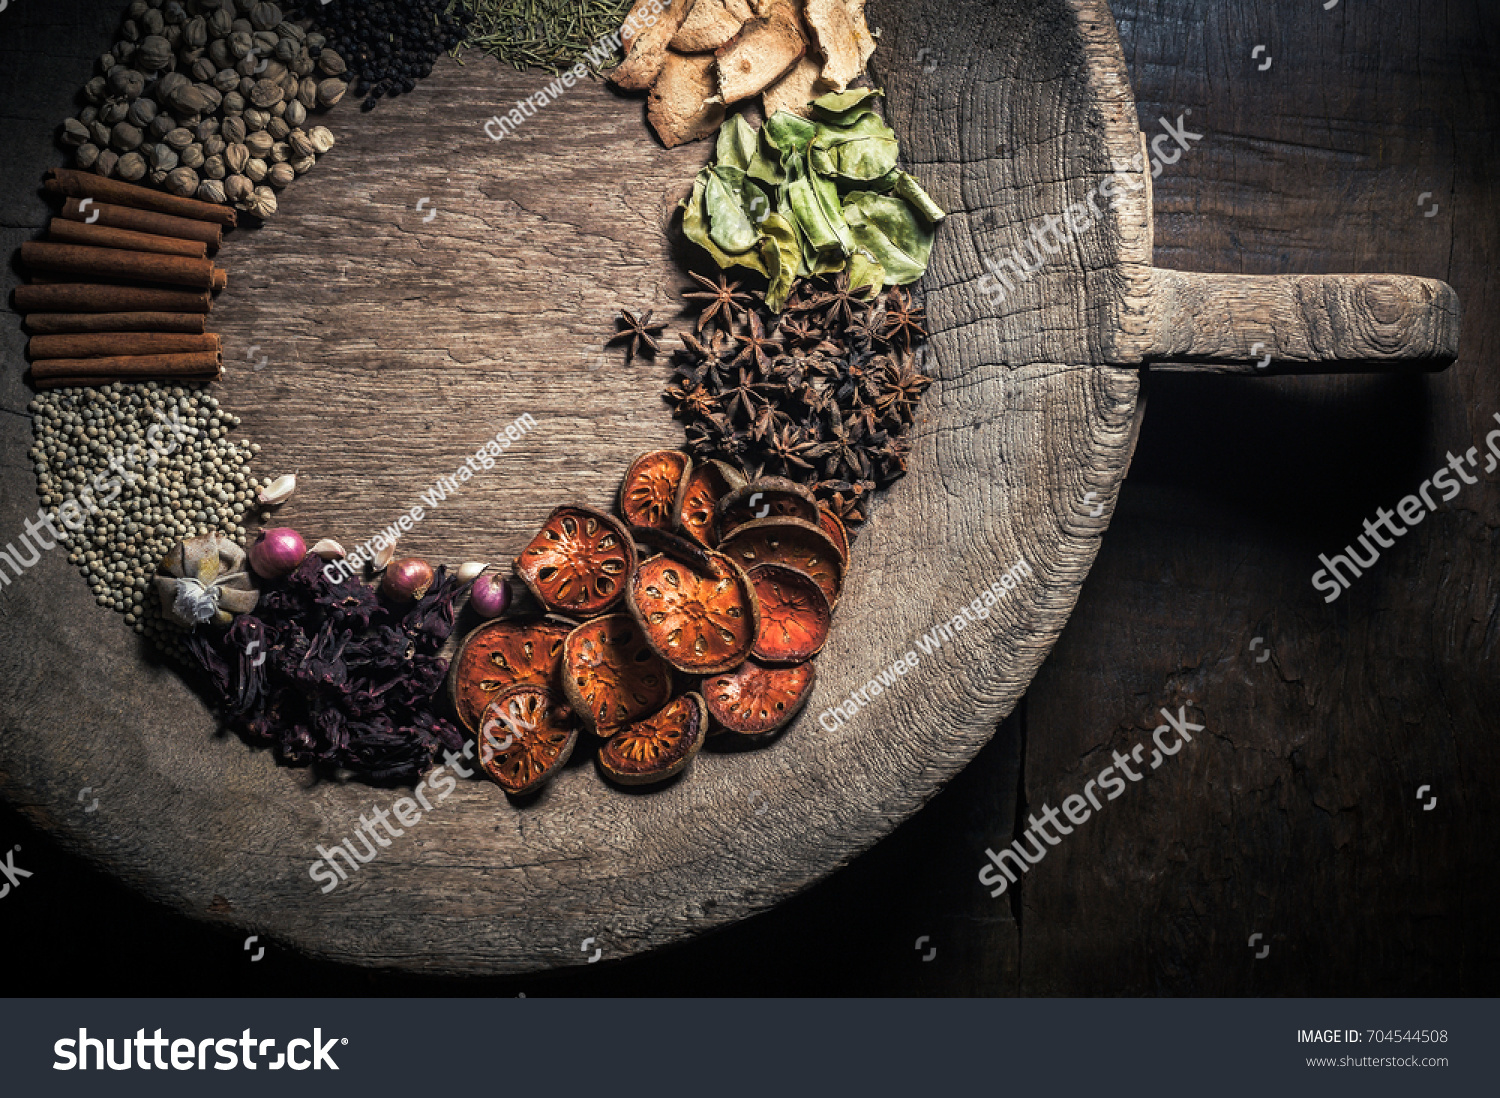 Selection Spices Herbs Ingredients Cooking Food Stock Photo 704544508 ...